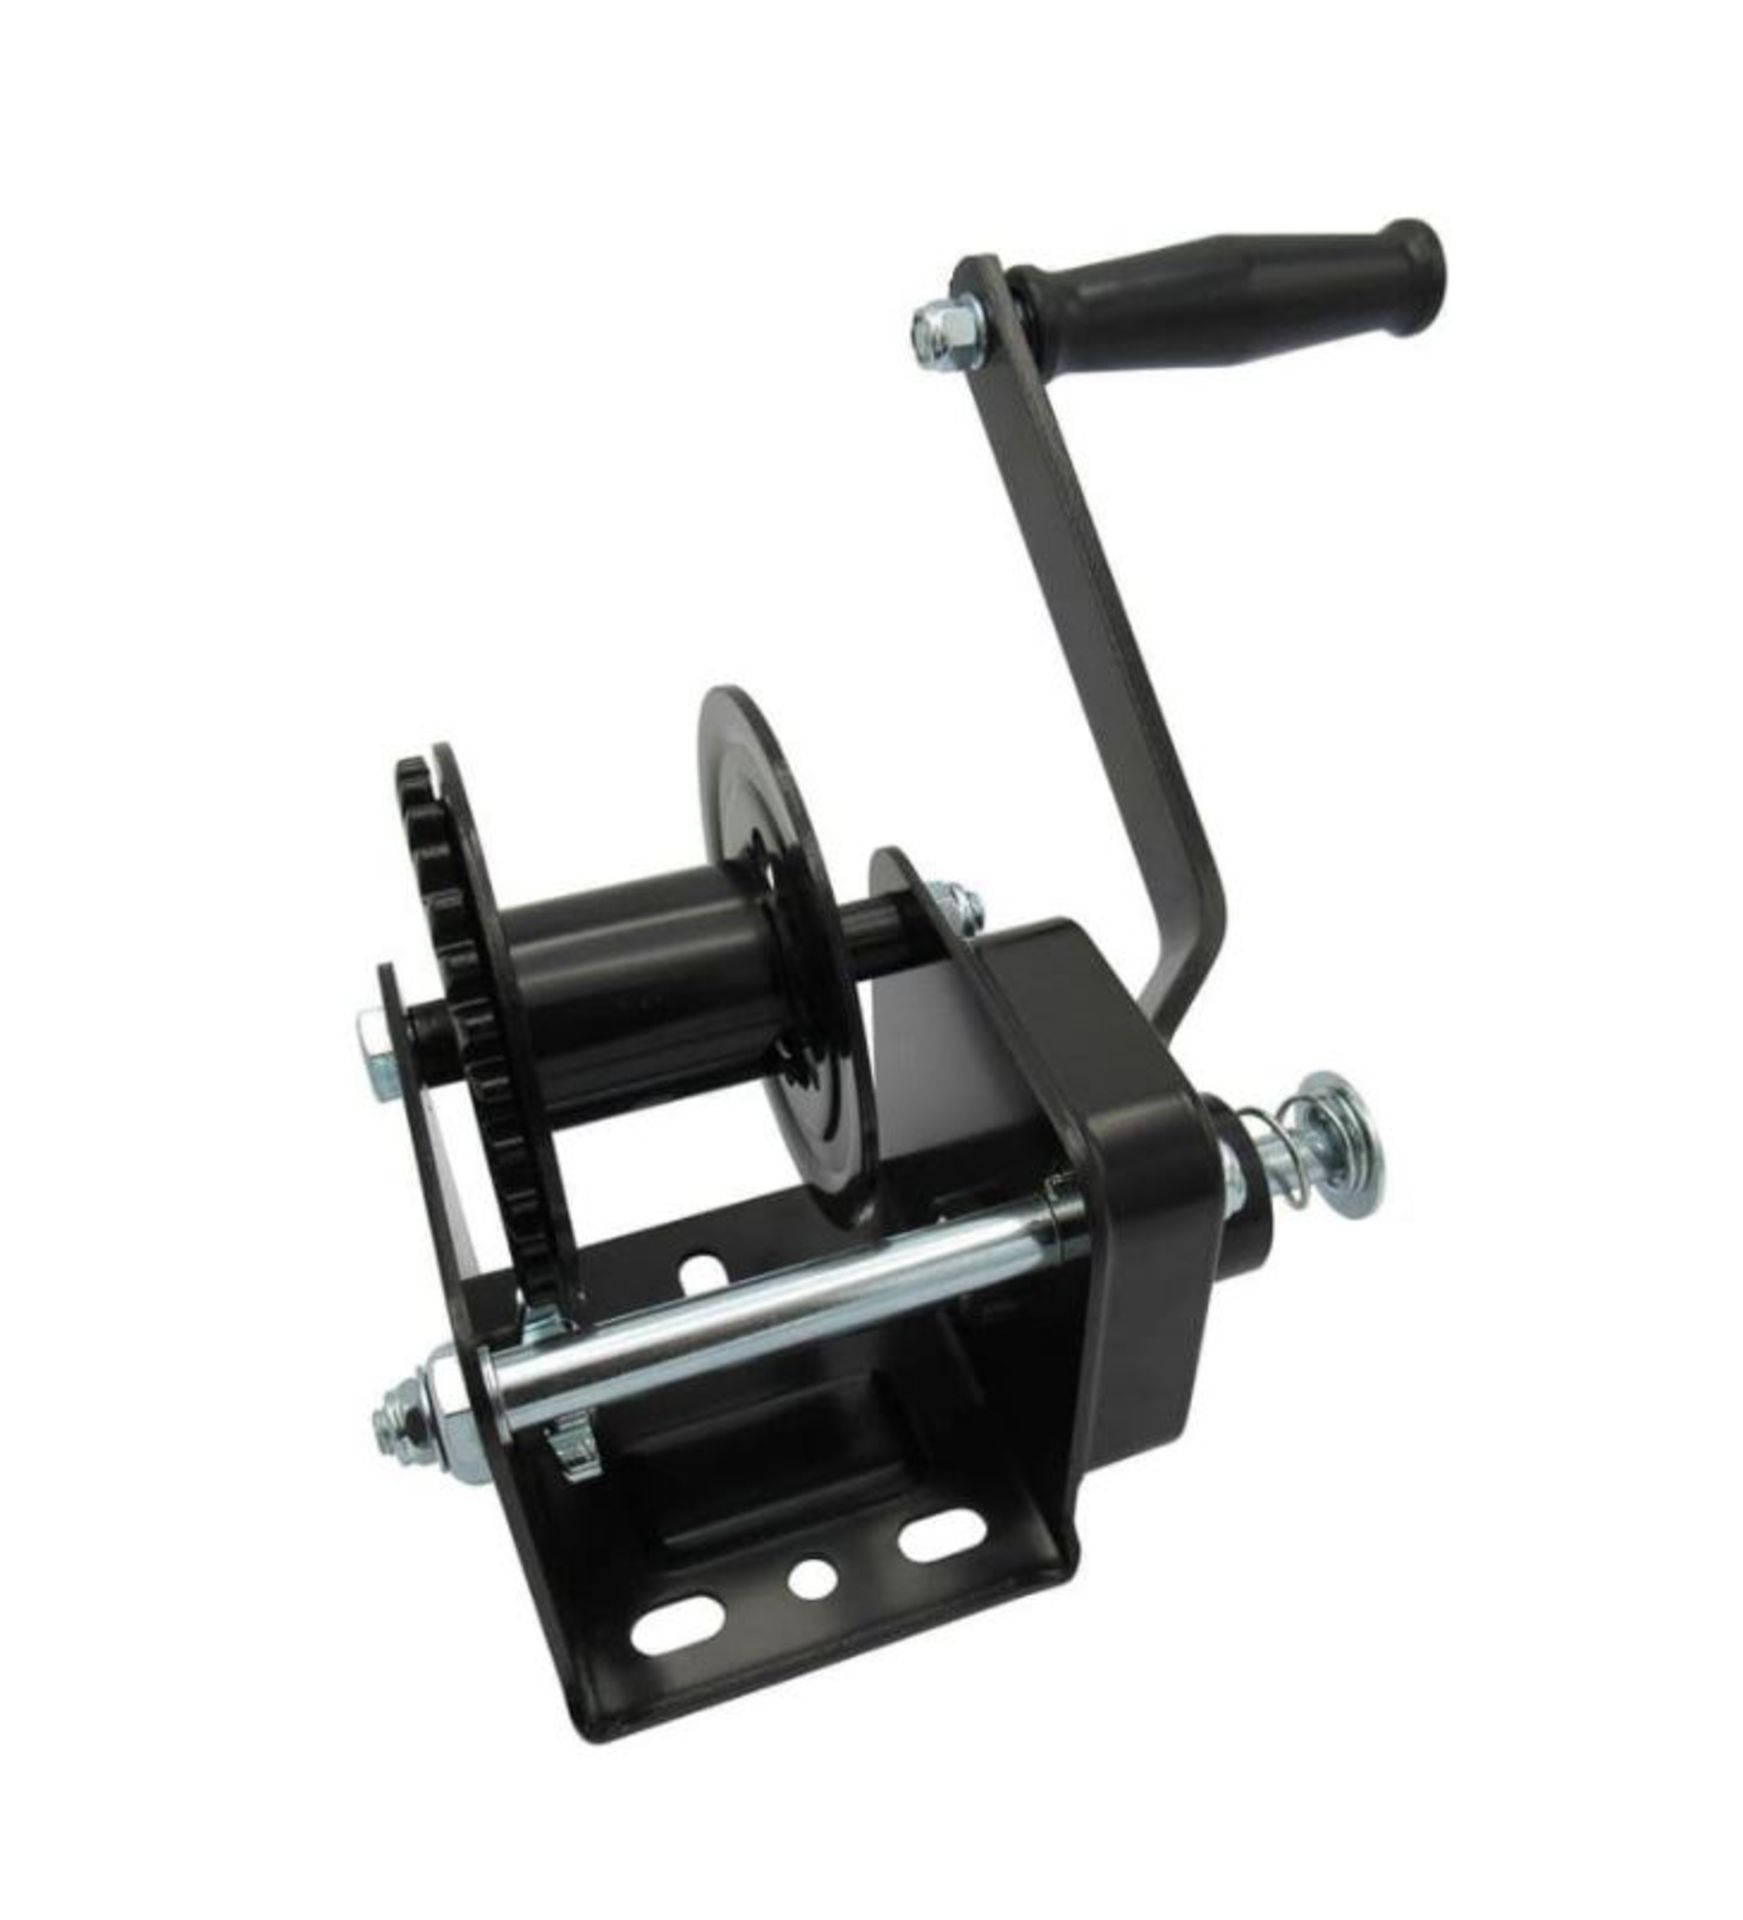 2 X 2000Lbs Black Hand Winch With Brake (Not For Lifting) (Hwb20)